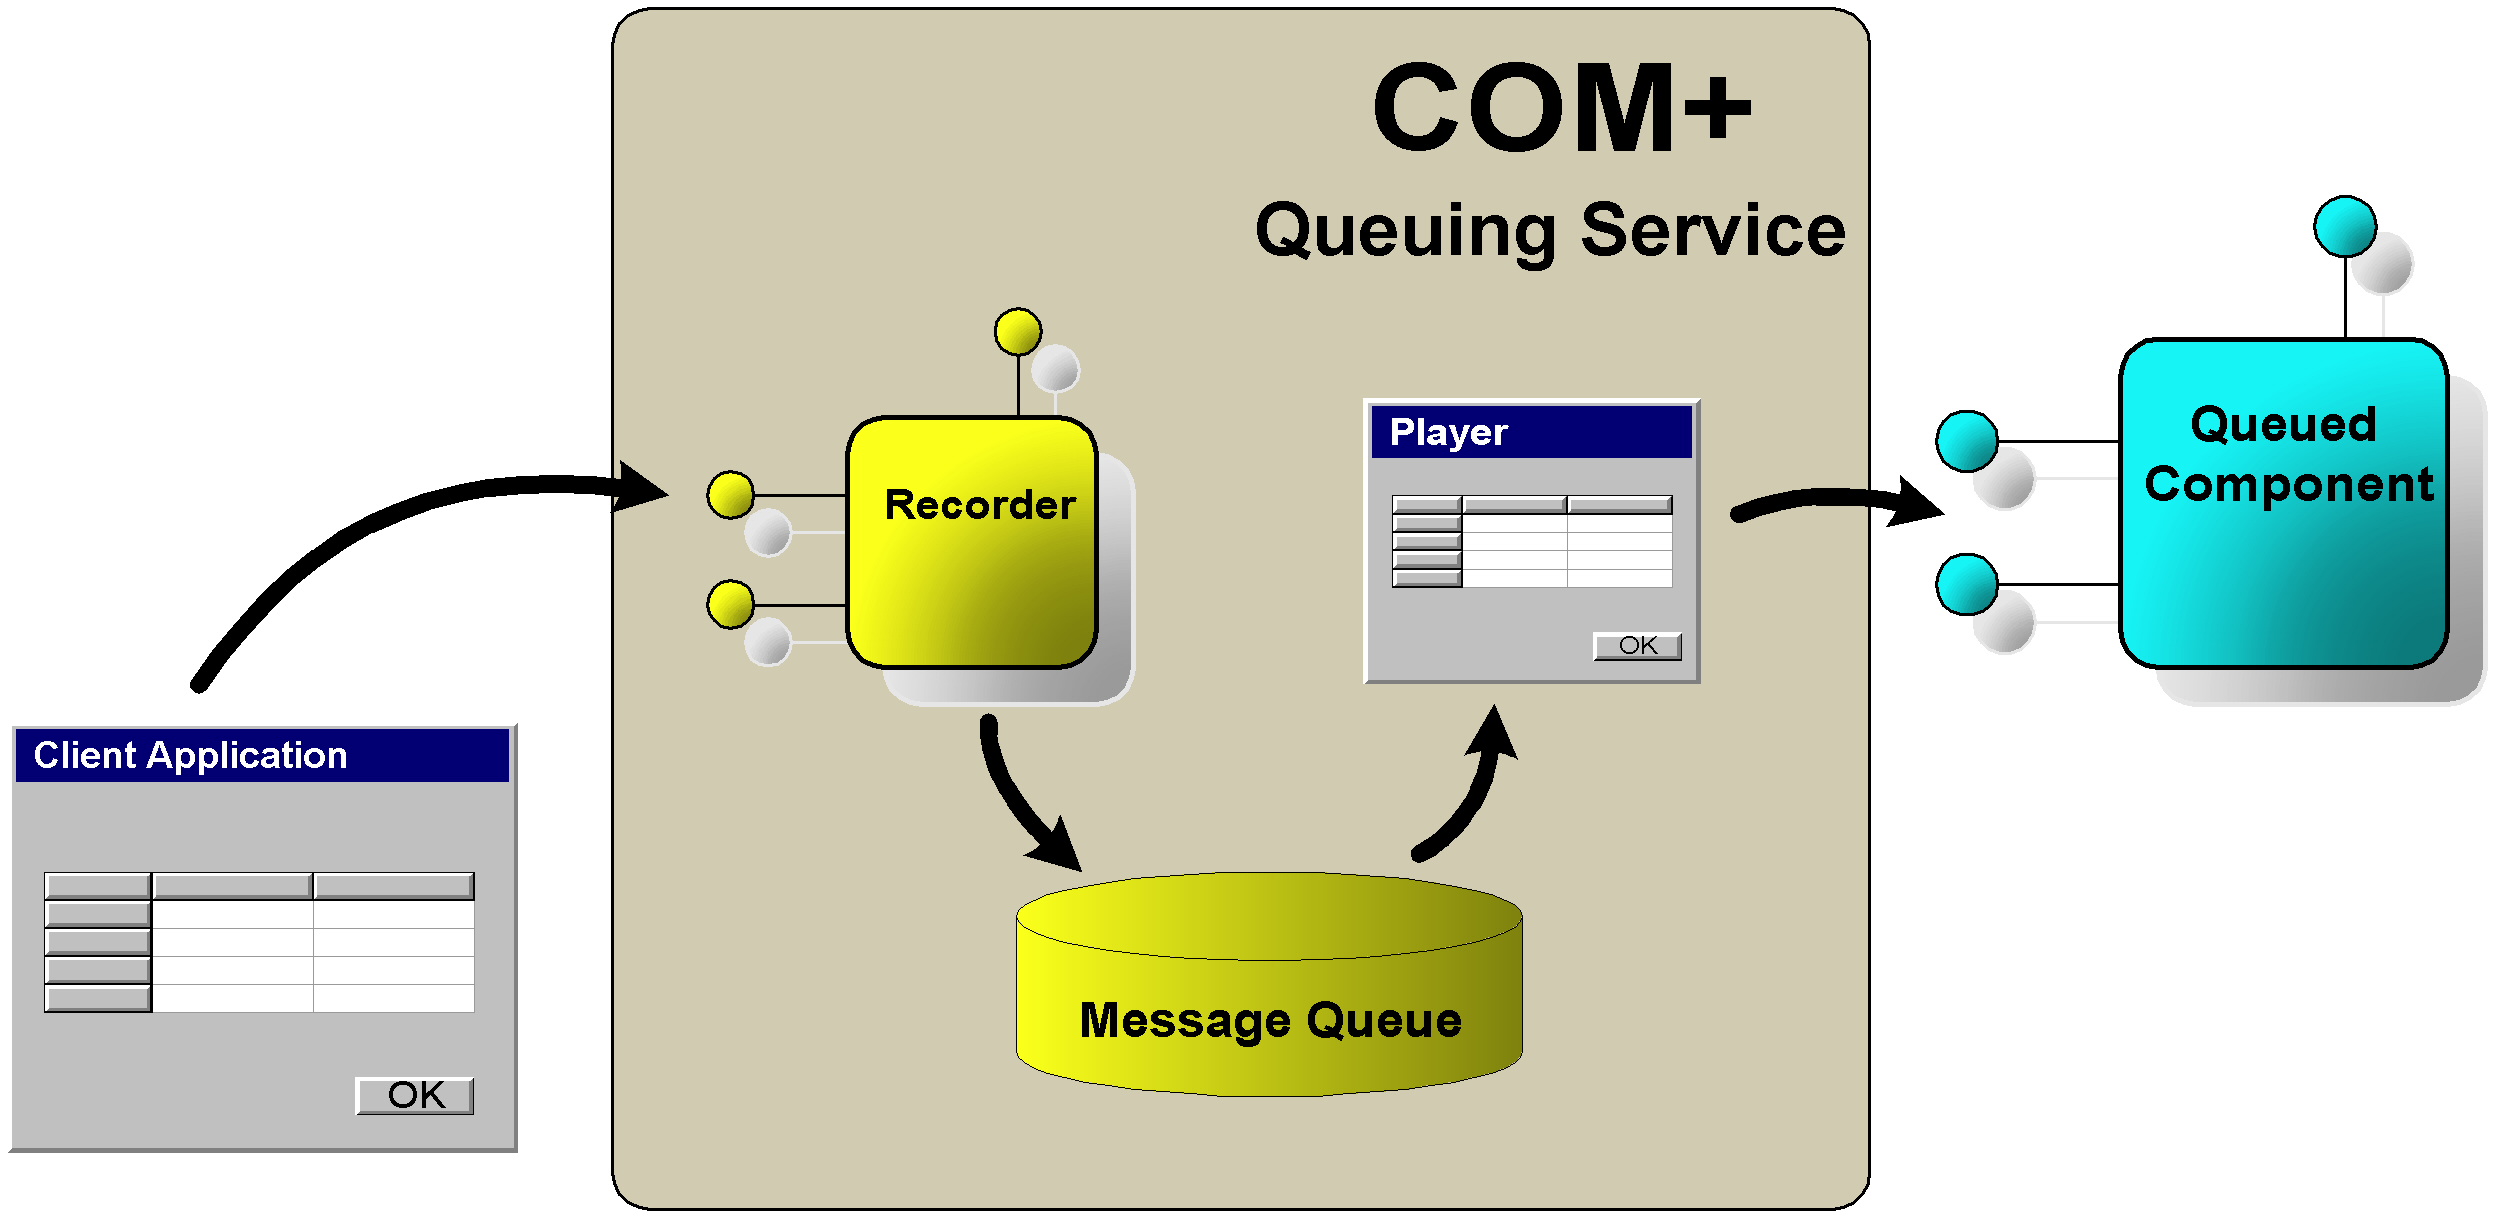 Figure 1 - A caller instantiates a COM+ component, or so it thinks. In reality, the call is intercepted by COM+, all the messages are recorded, and later they are played to the actual component by a player object pretending to be the original caller.